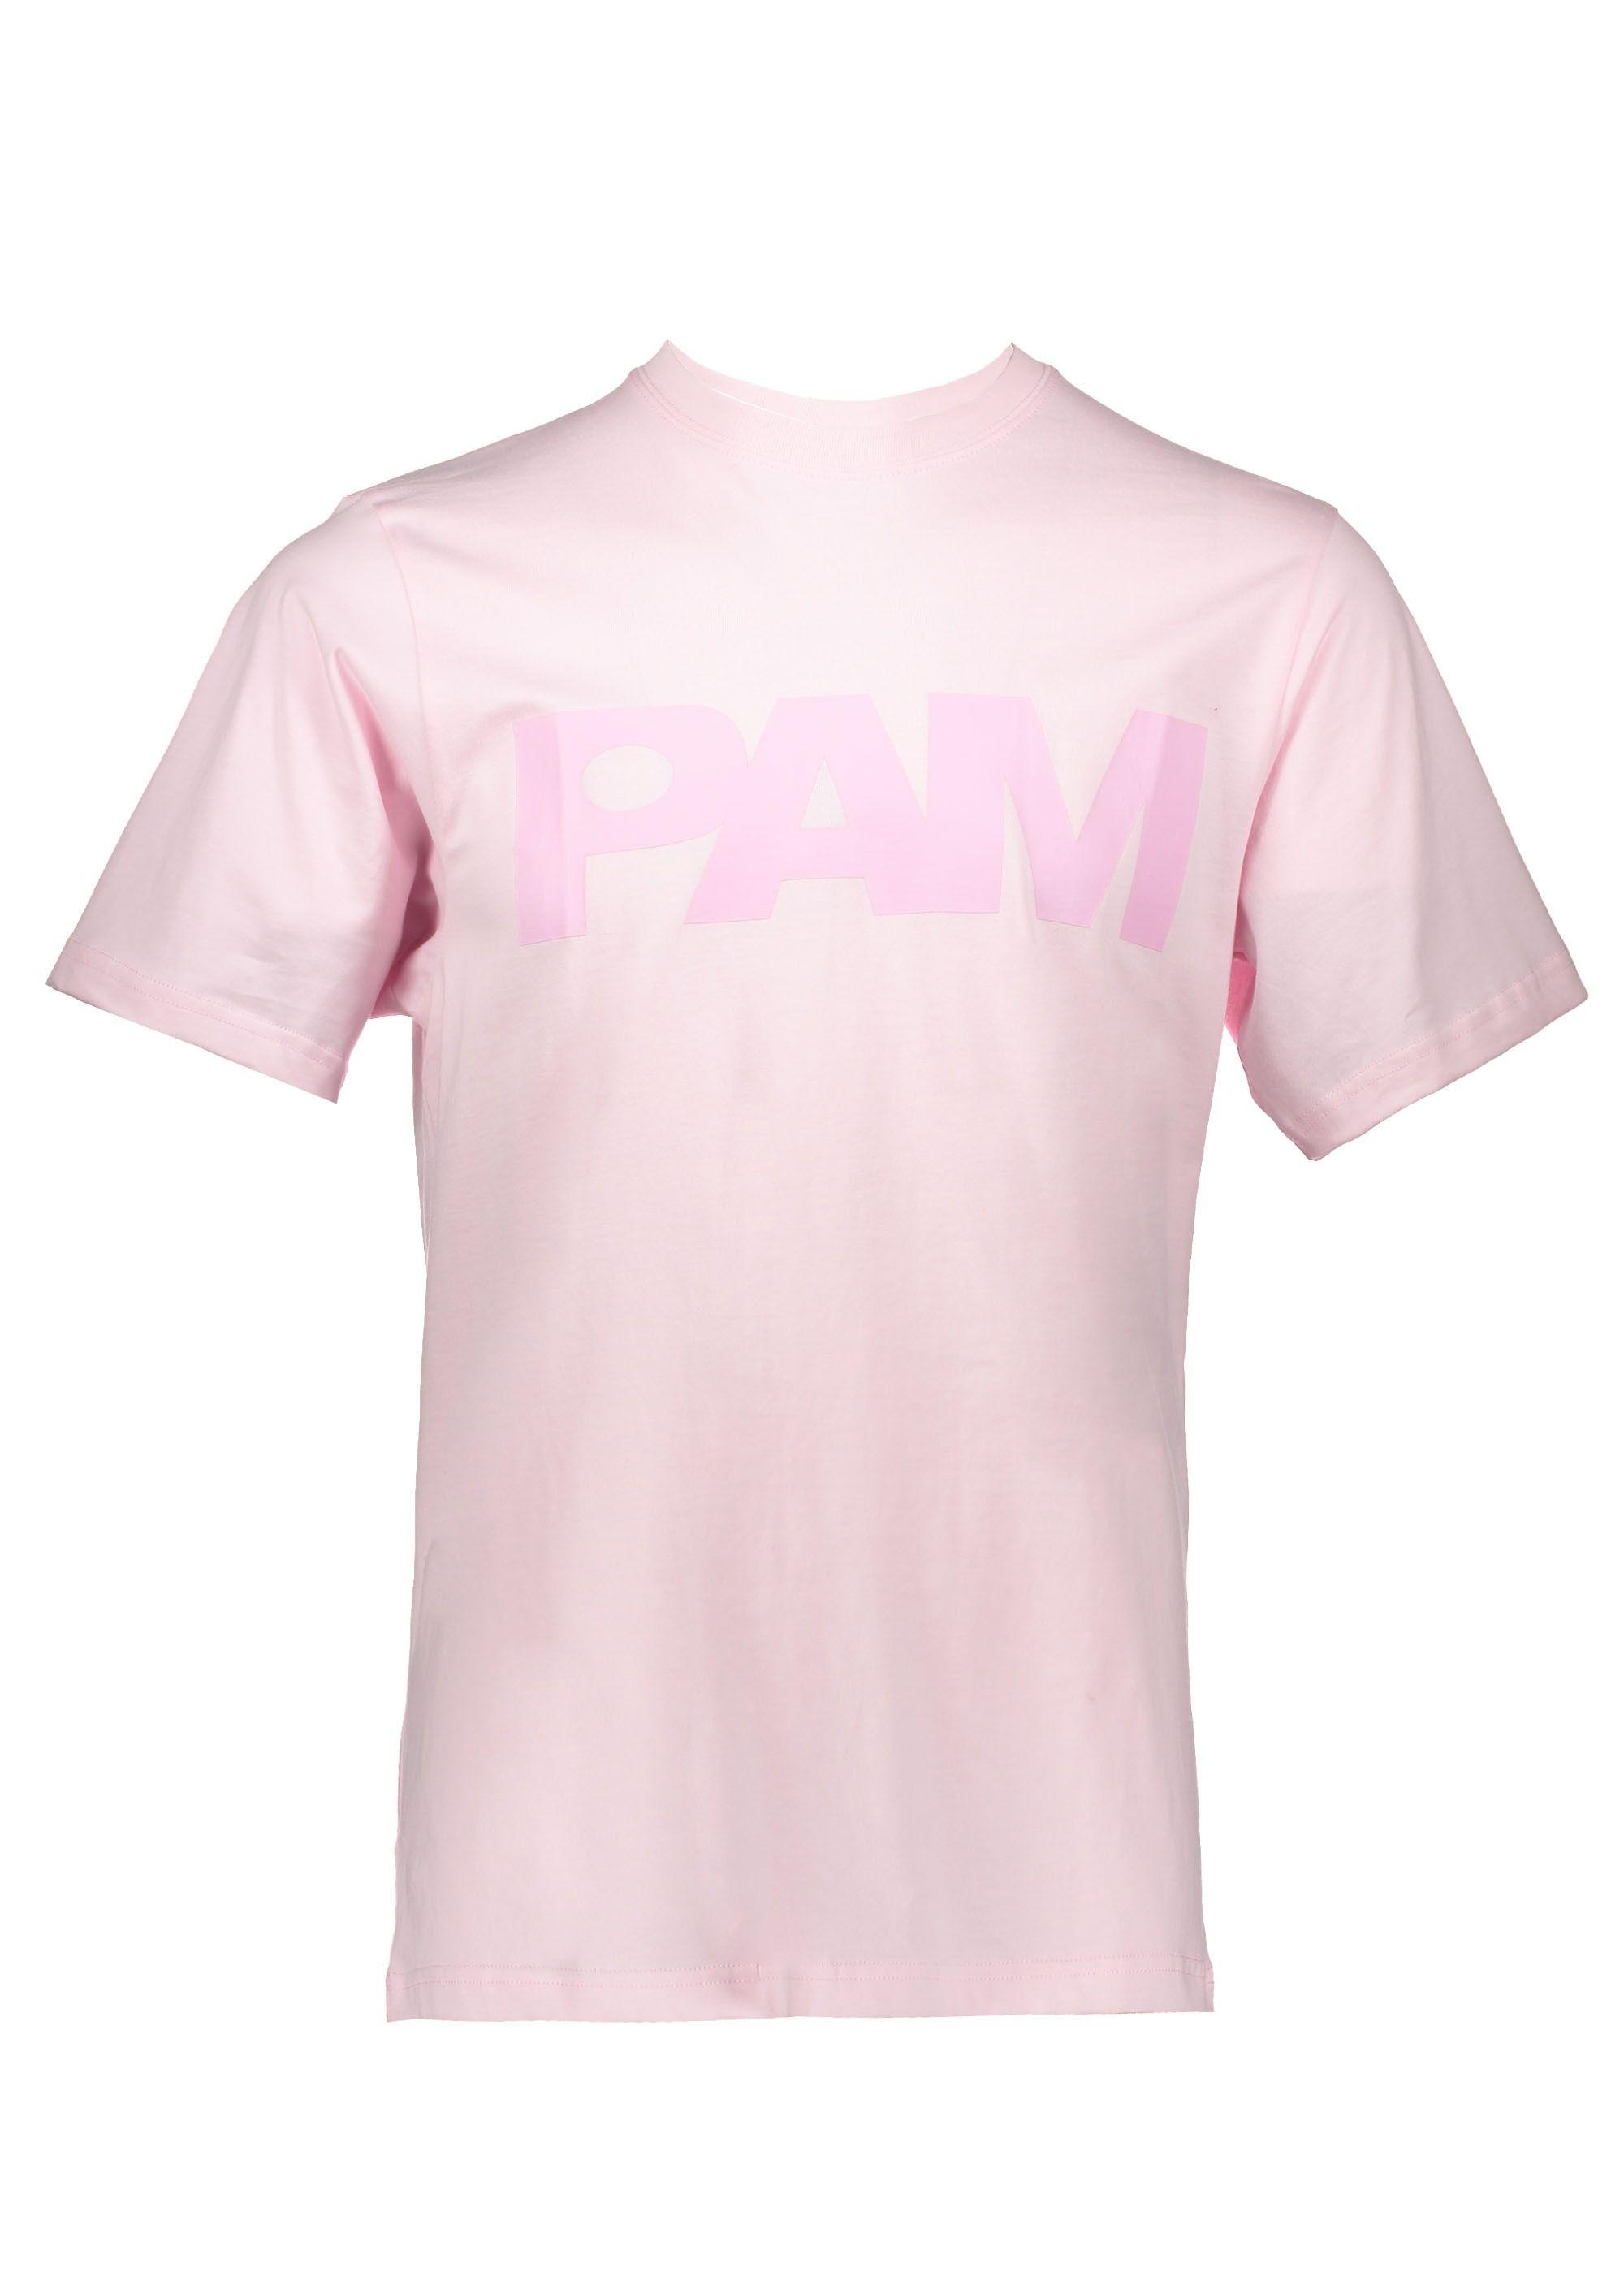 Pink T Logo - Perks and Mini P.A.M S Loops Logo Tee - Pale Pink - T-shirts from ...